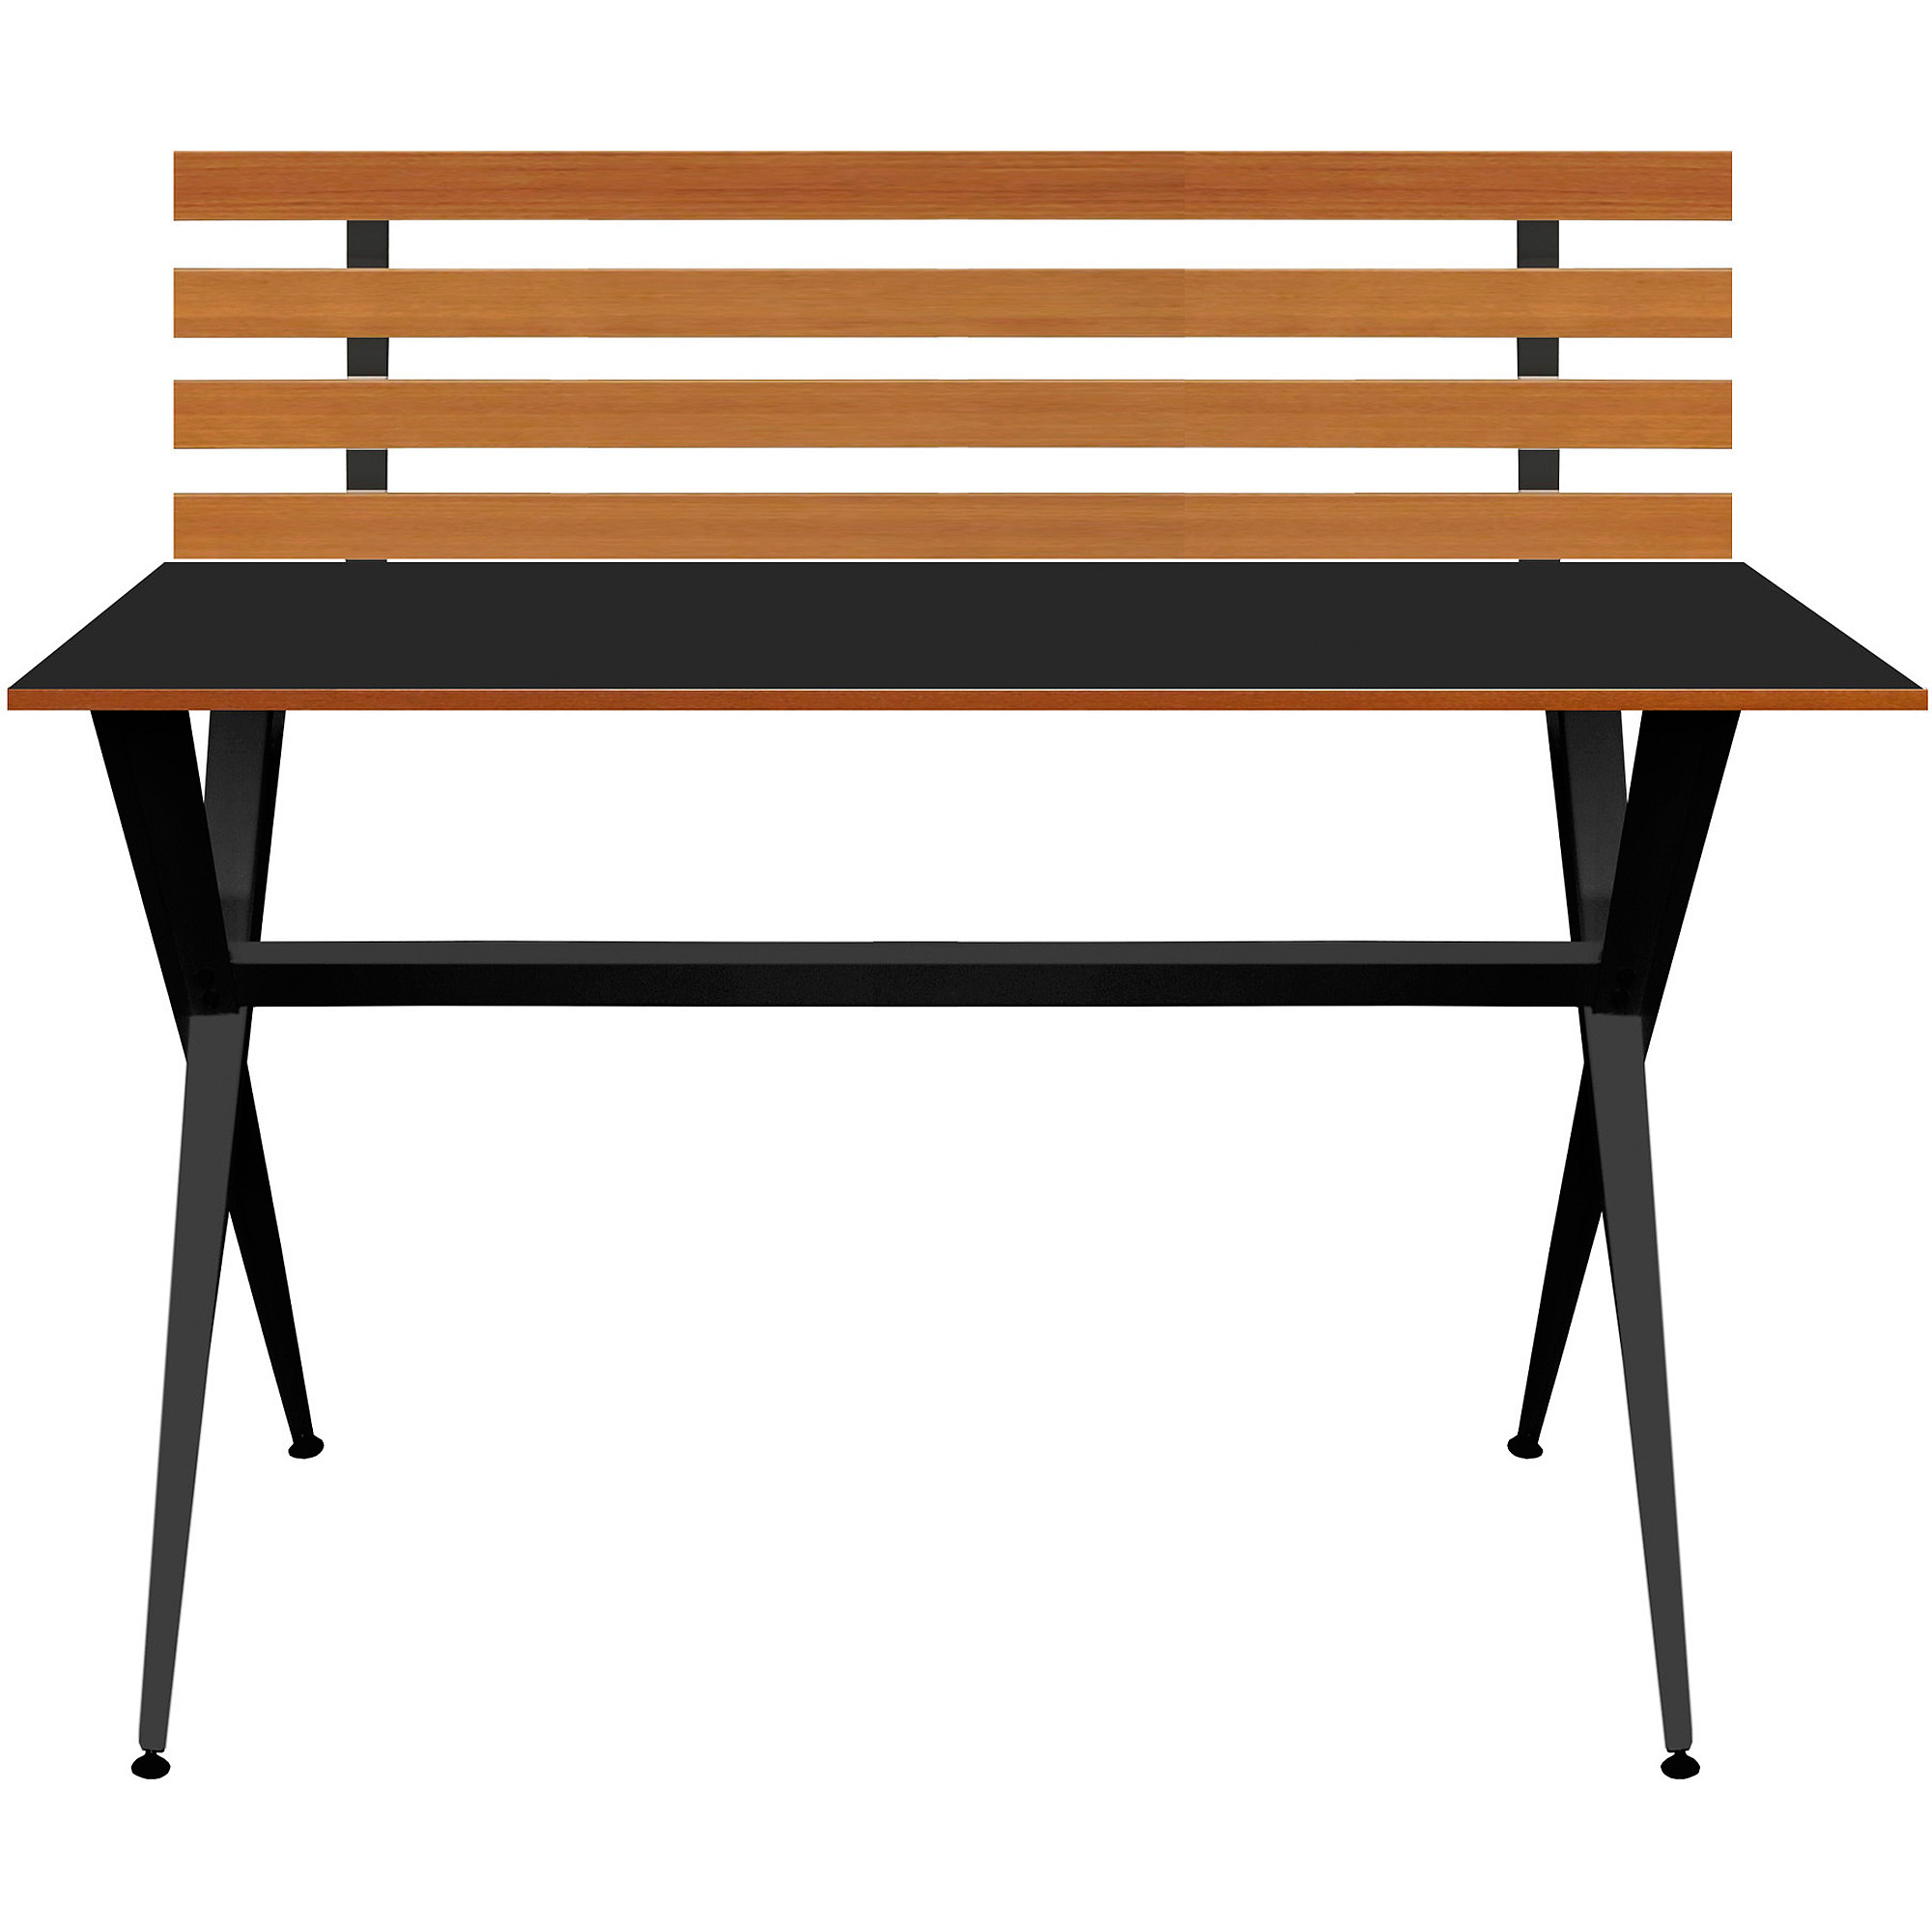 Your Zone Modern Desk with Wood Slab, Multiple Colors - image 1 of 3